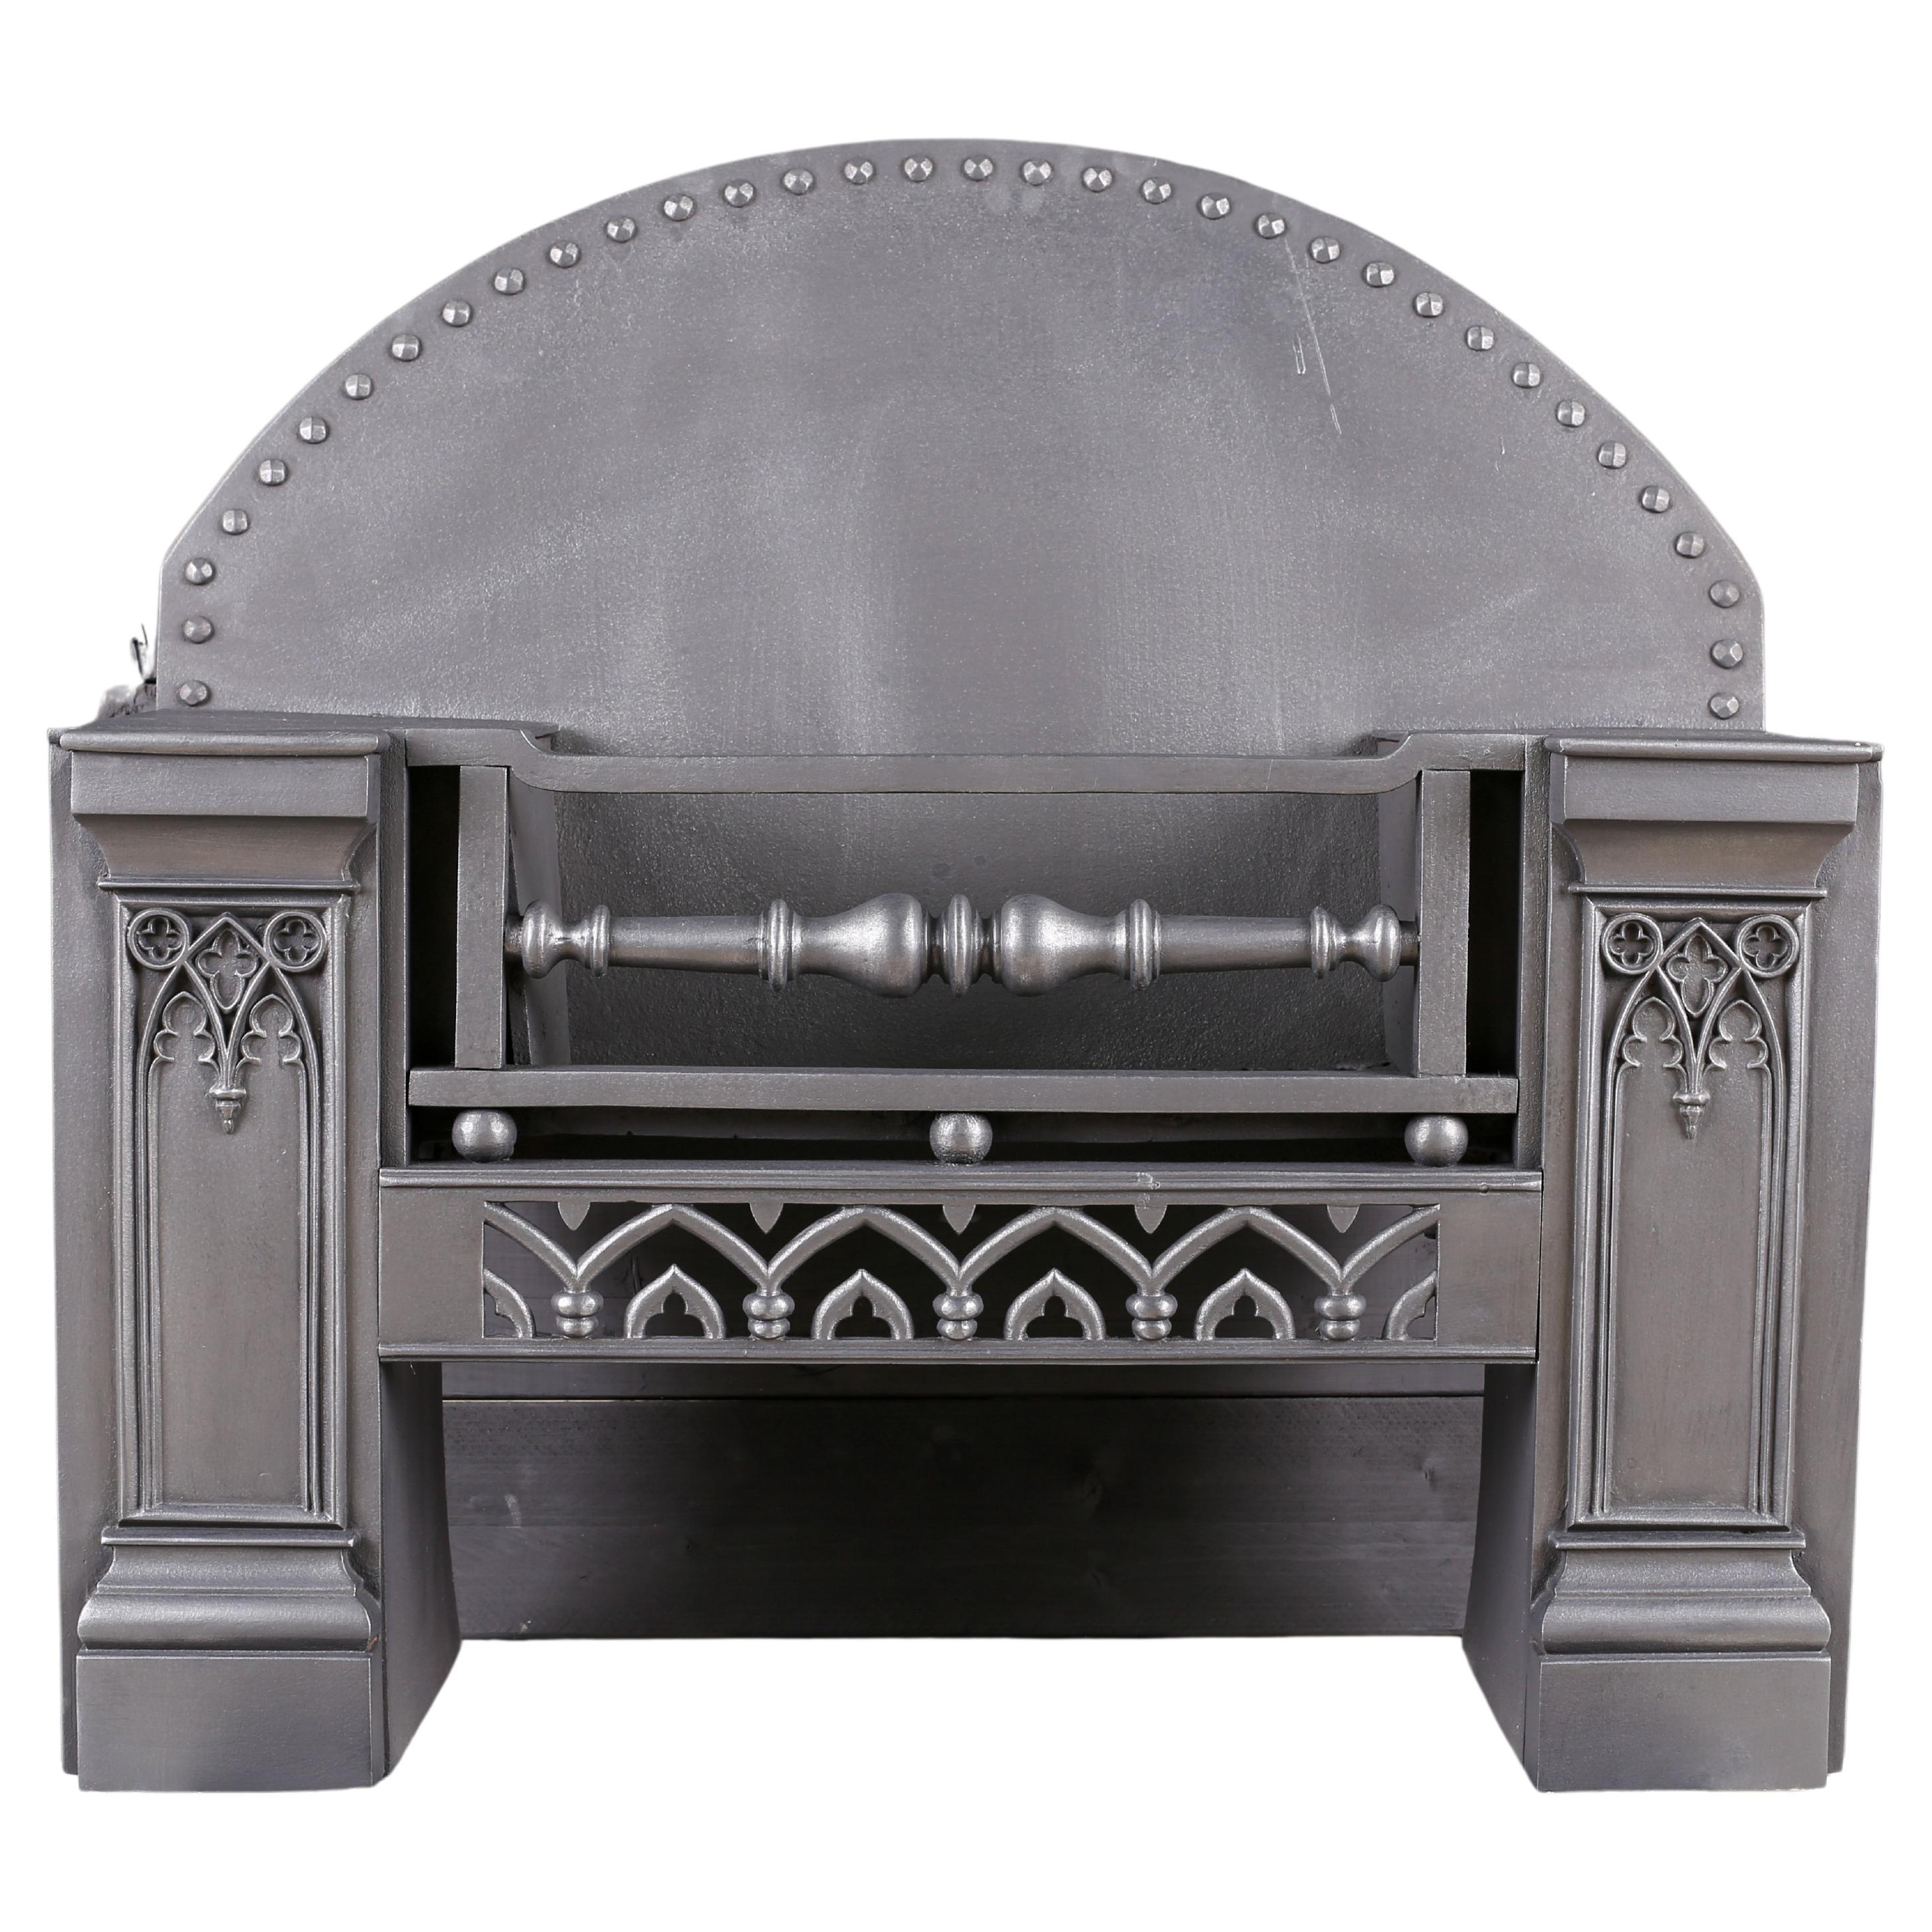 Grand Cast Iron Victorian Gothic Revival Hob Grate Fireplace, English, C.1860 For Sale